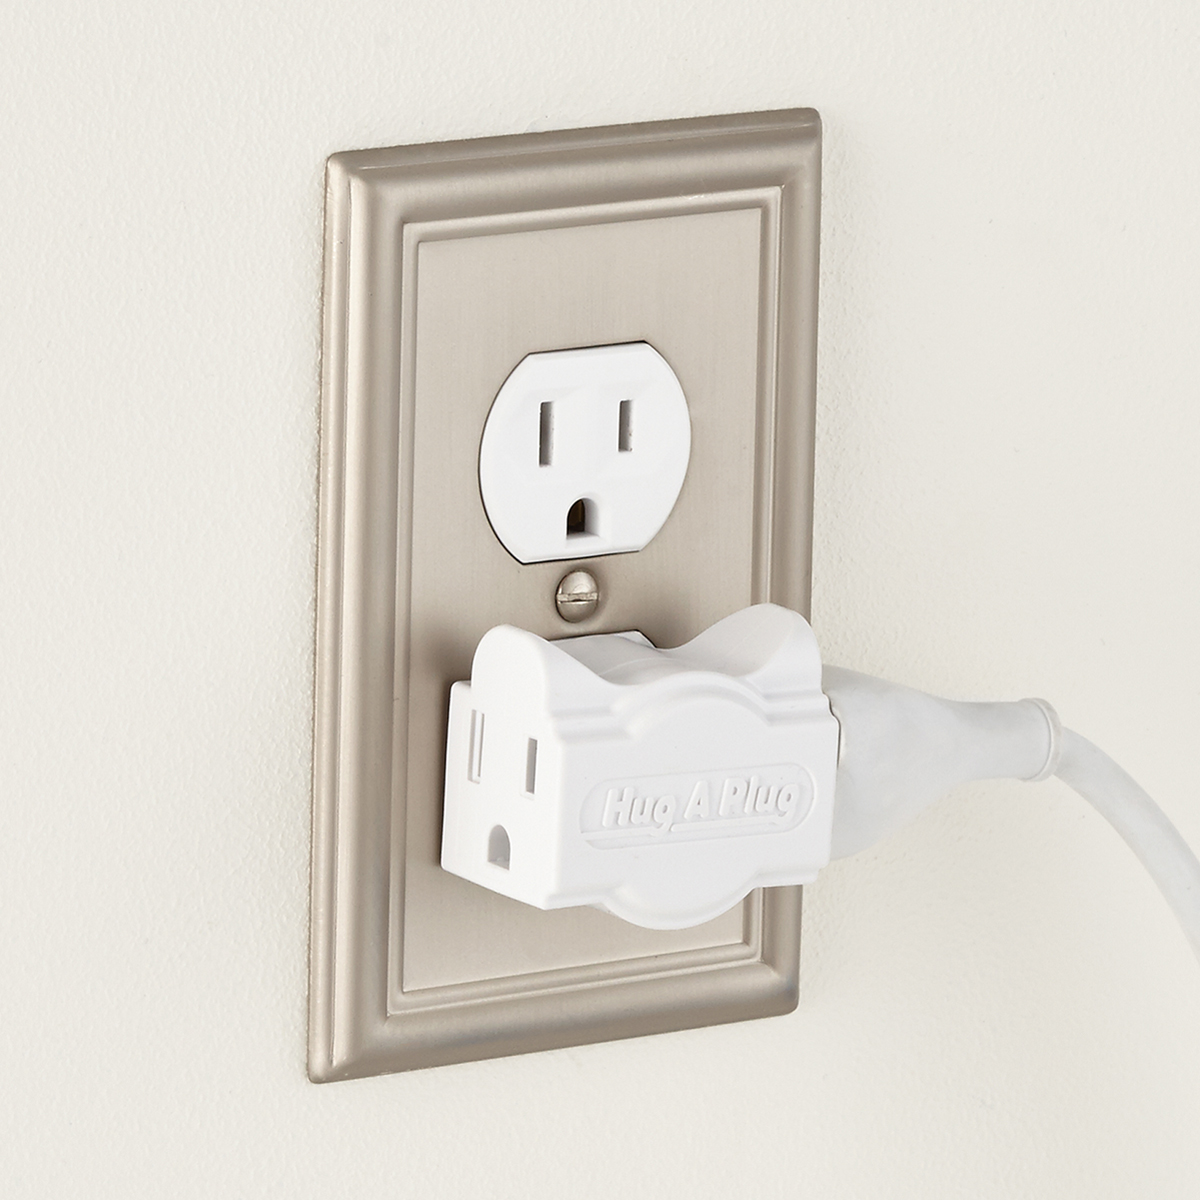 Hug-A-Plug Outlet Extender | The Container Store